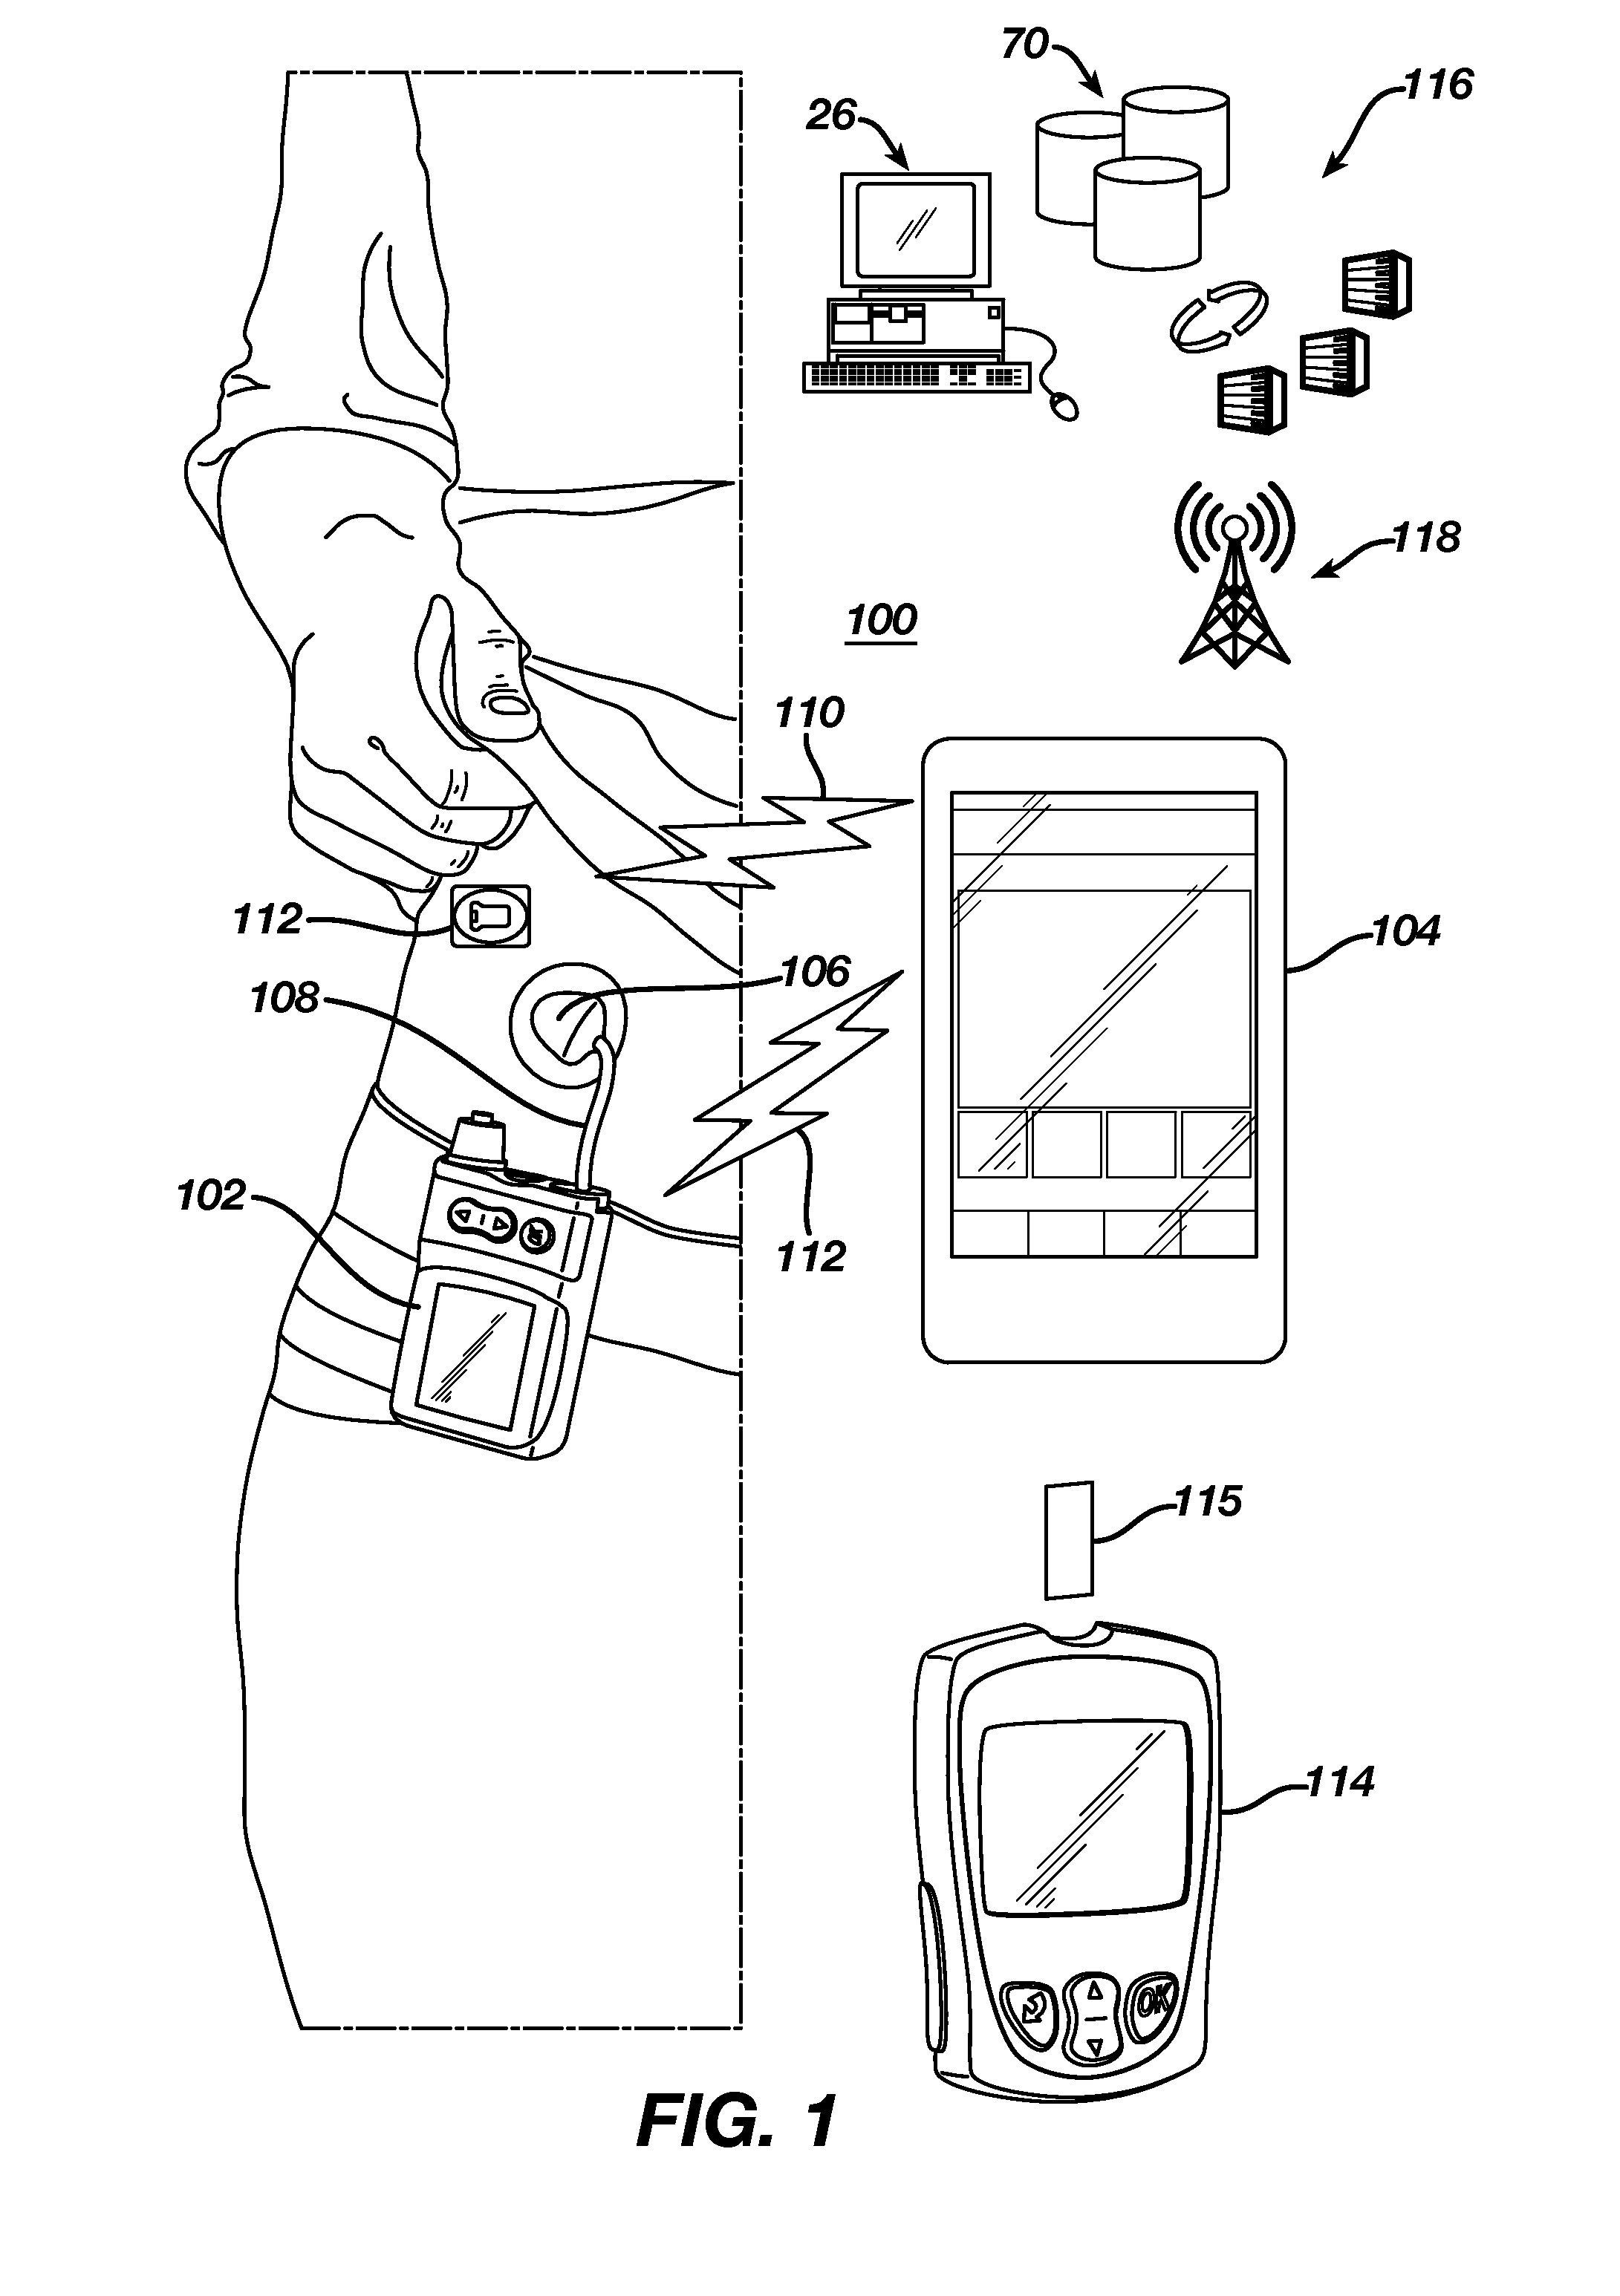 Method and system for management of diabetes with a glucose monitor and infusion pump to provide feedback on bolus dosing